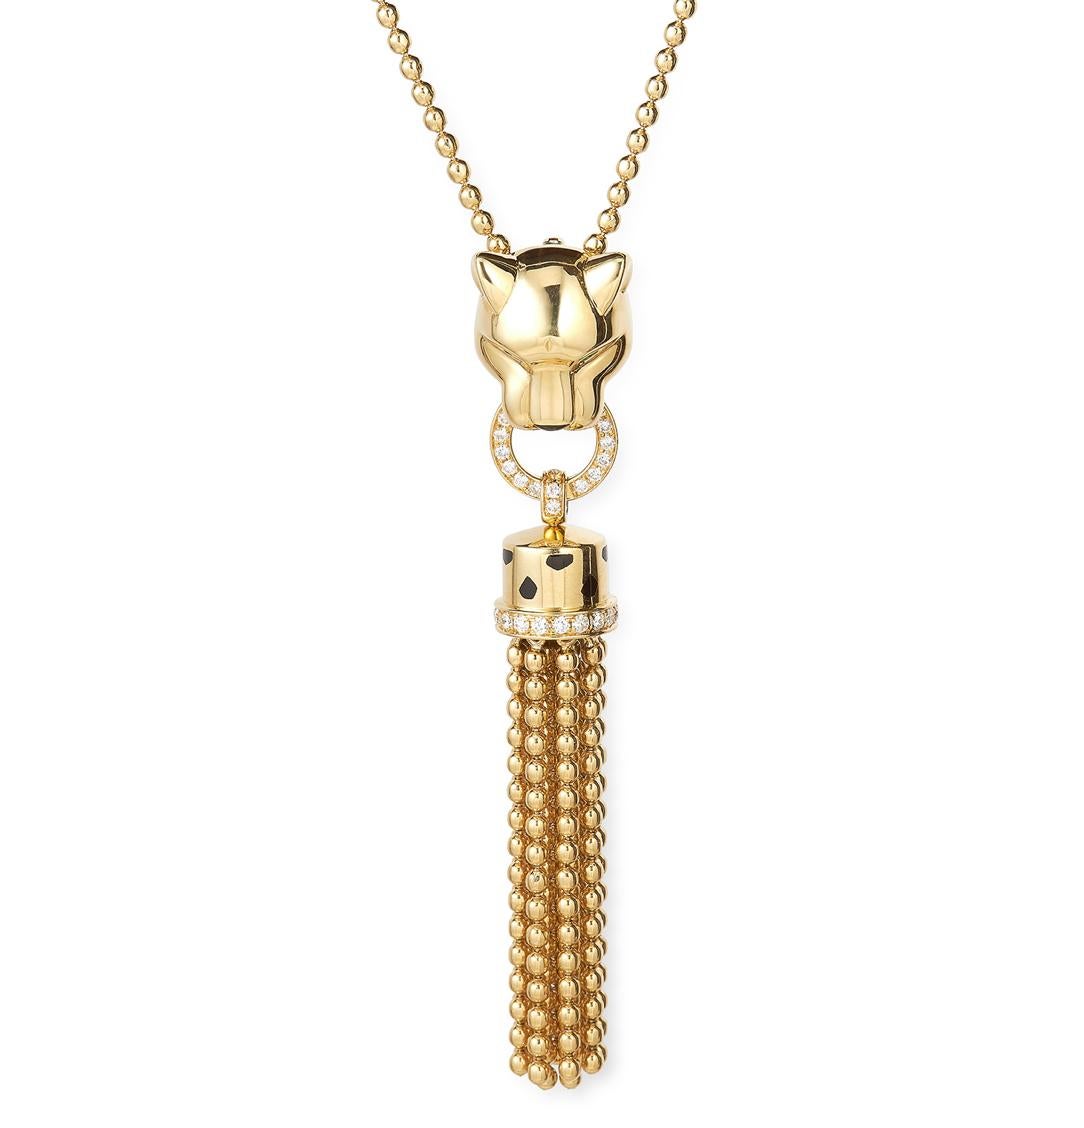 A Cartier “Panthère de Cartier” Diamond Pendant Necklace in 18 Karat Yellow Gold, French, 2000s. This iconic jewel is designed as a panther's head with tsavorite garnet eyes biting a pendant composed of an open hoop and a gold bead tassel, set with